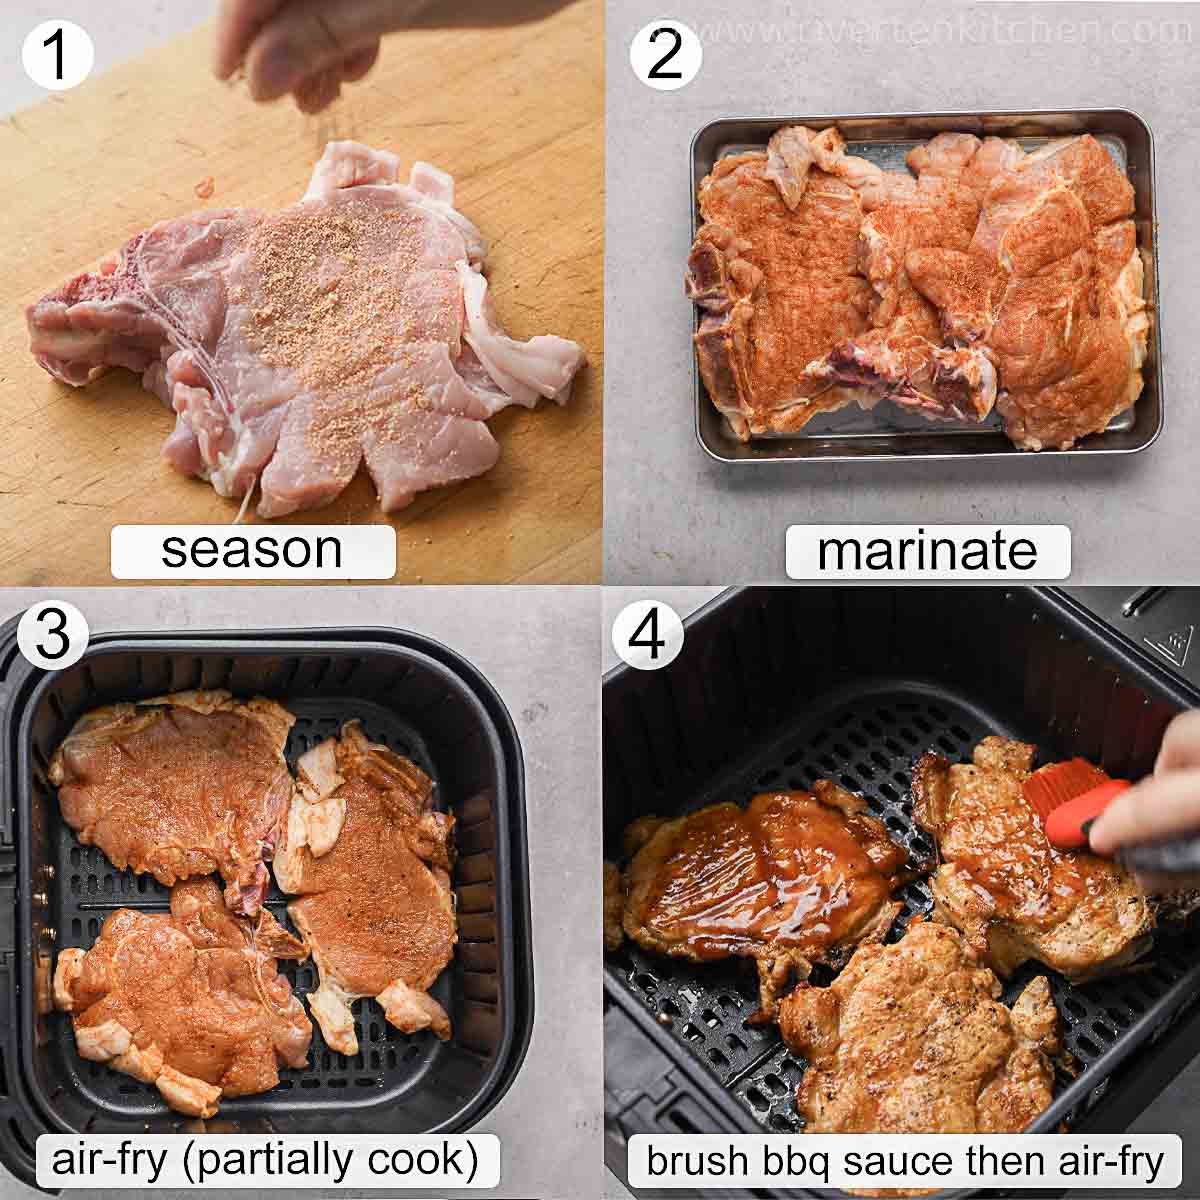 steps on how to prepare pork chops for air-frying - seasoning pork chops, marinate pork chops and air-frying.